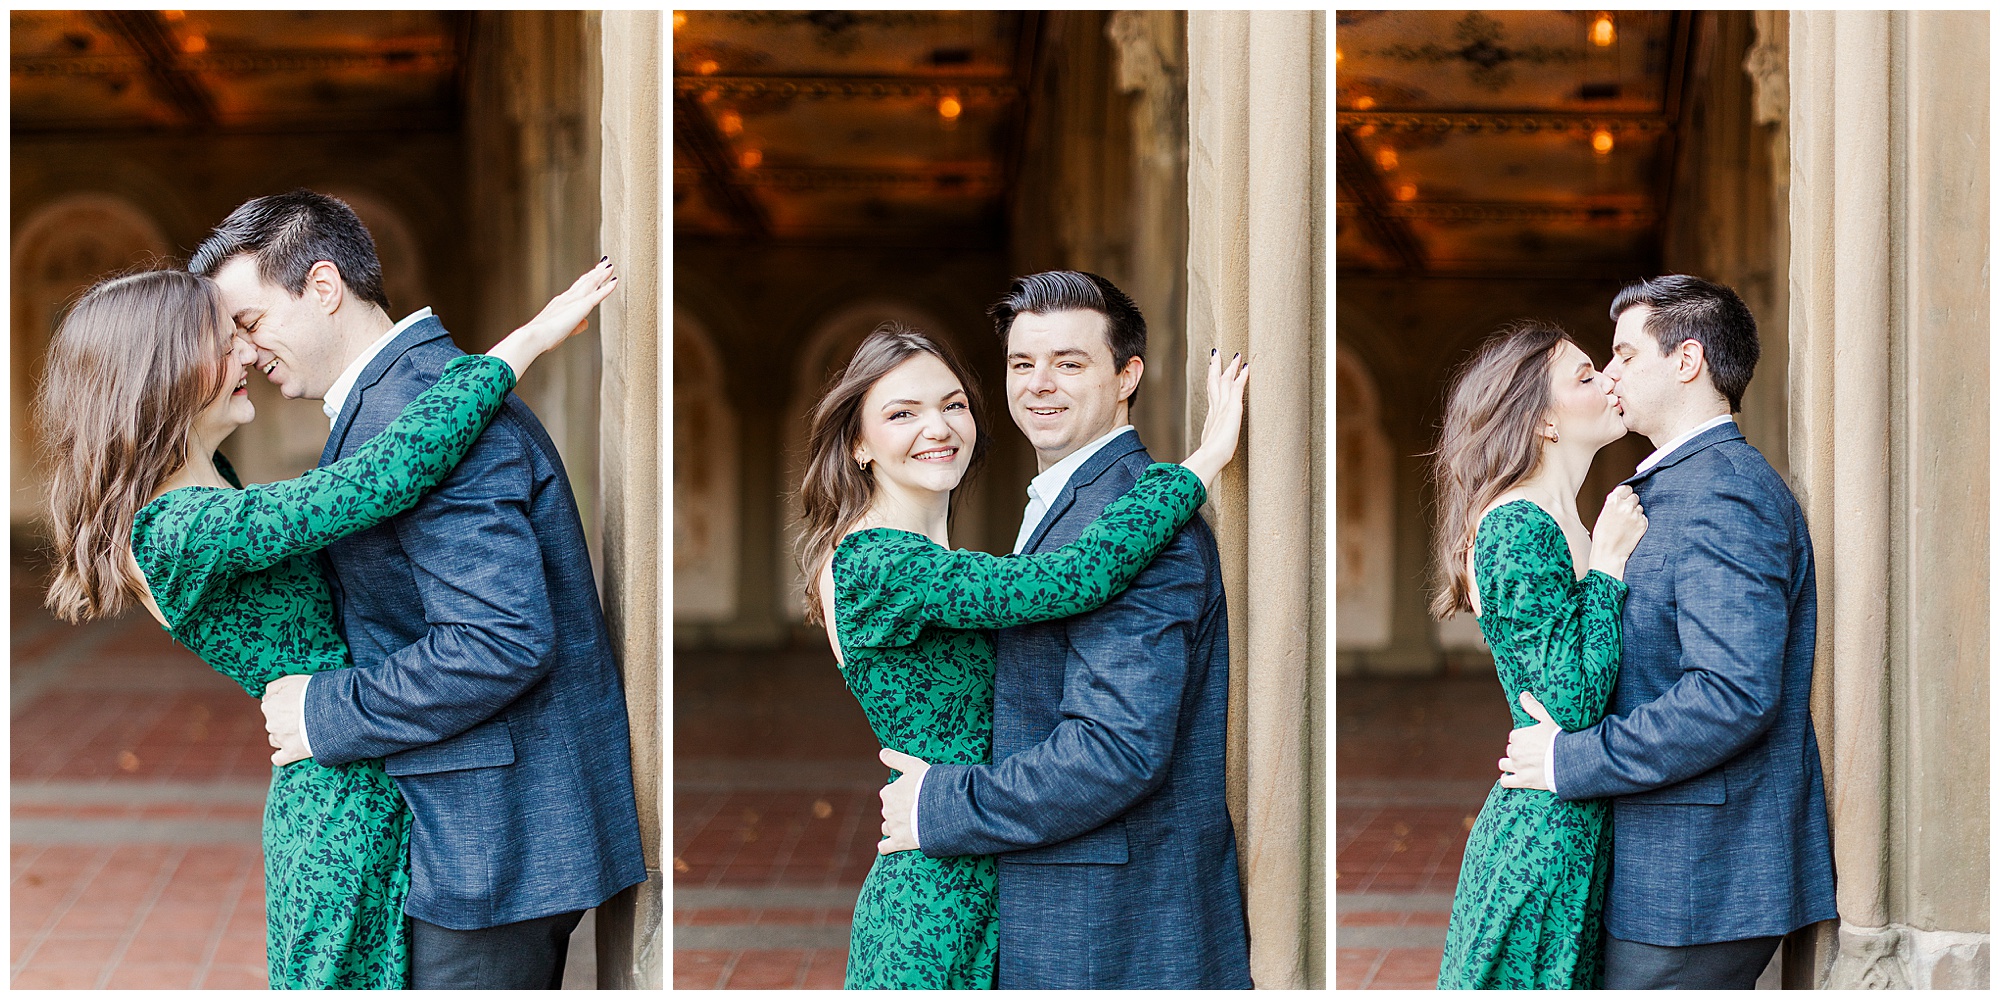 Timeless Engagement Photoshoot in Central Park